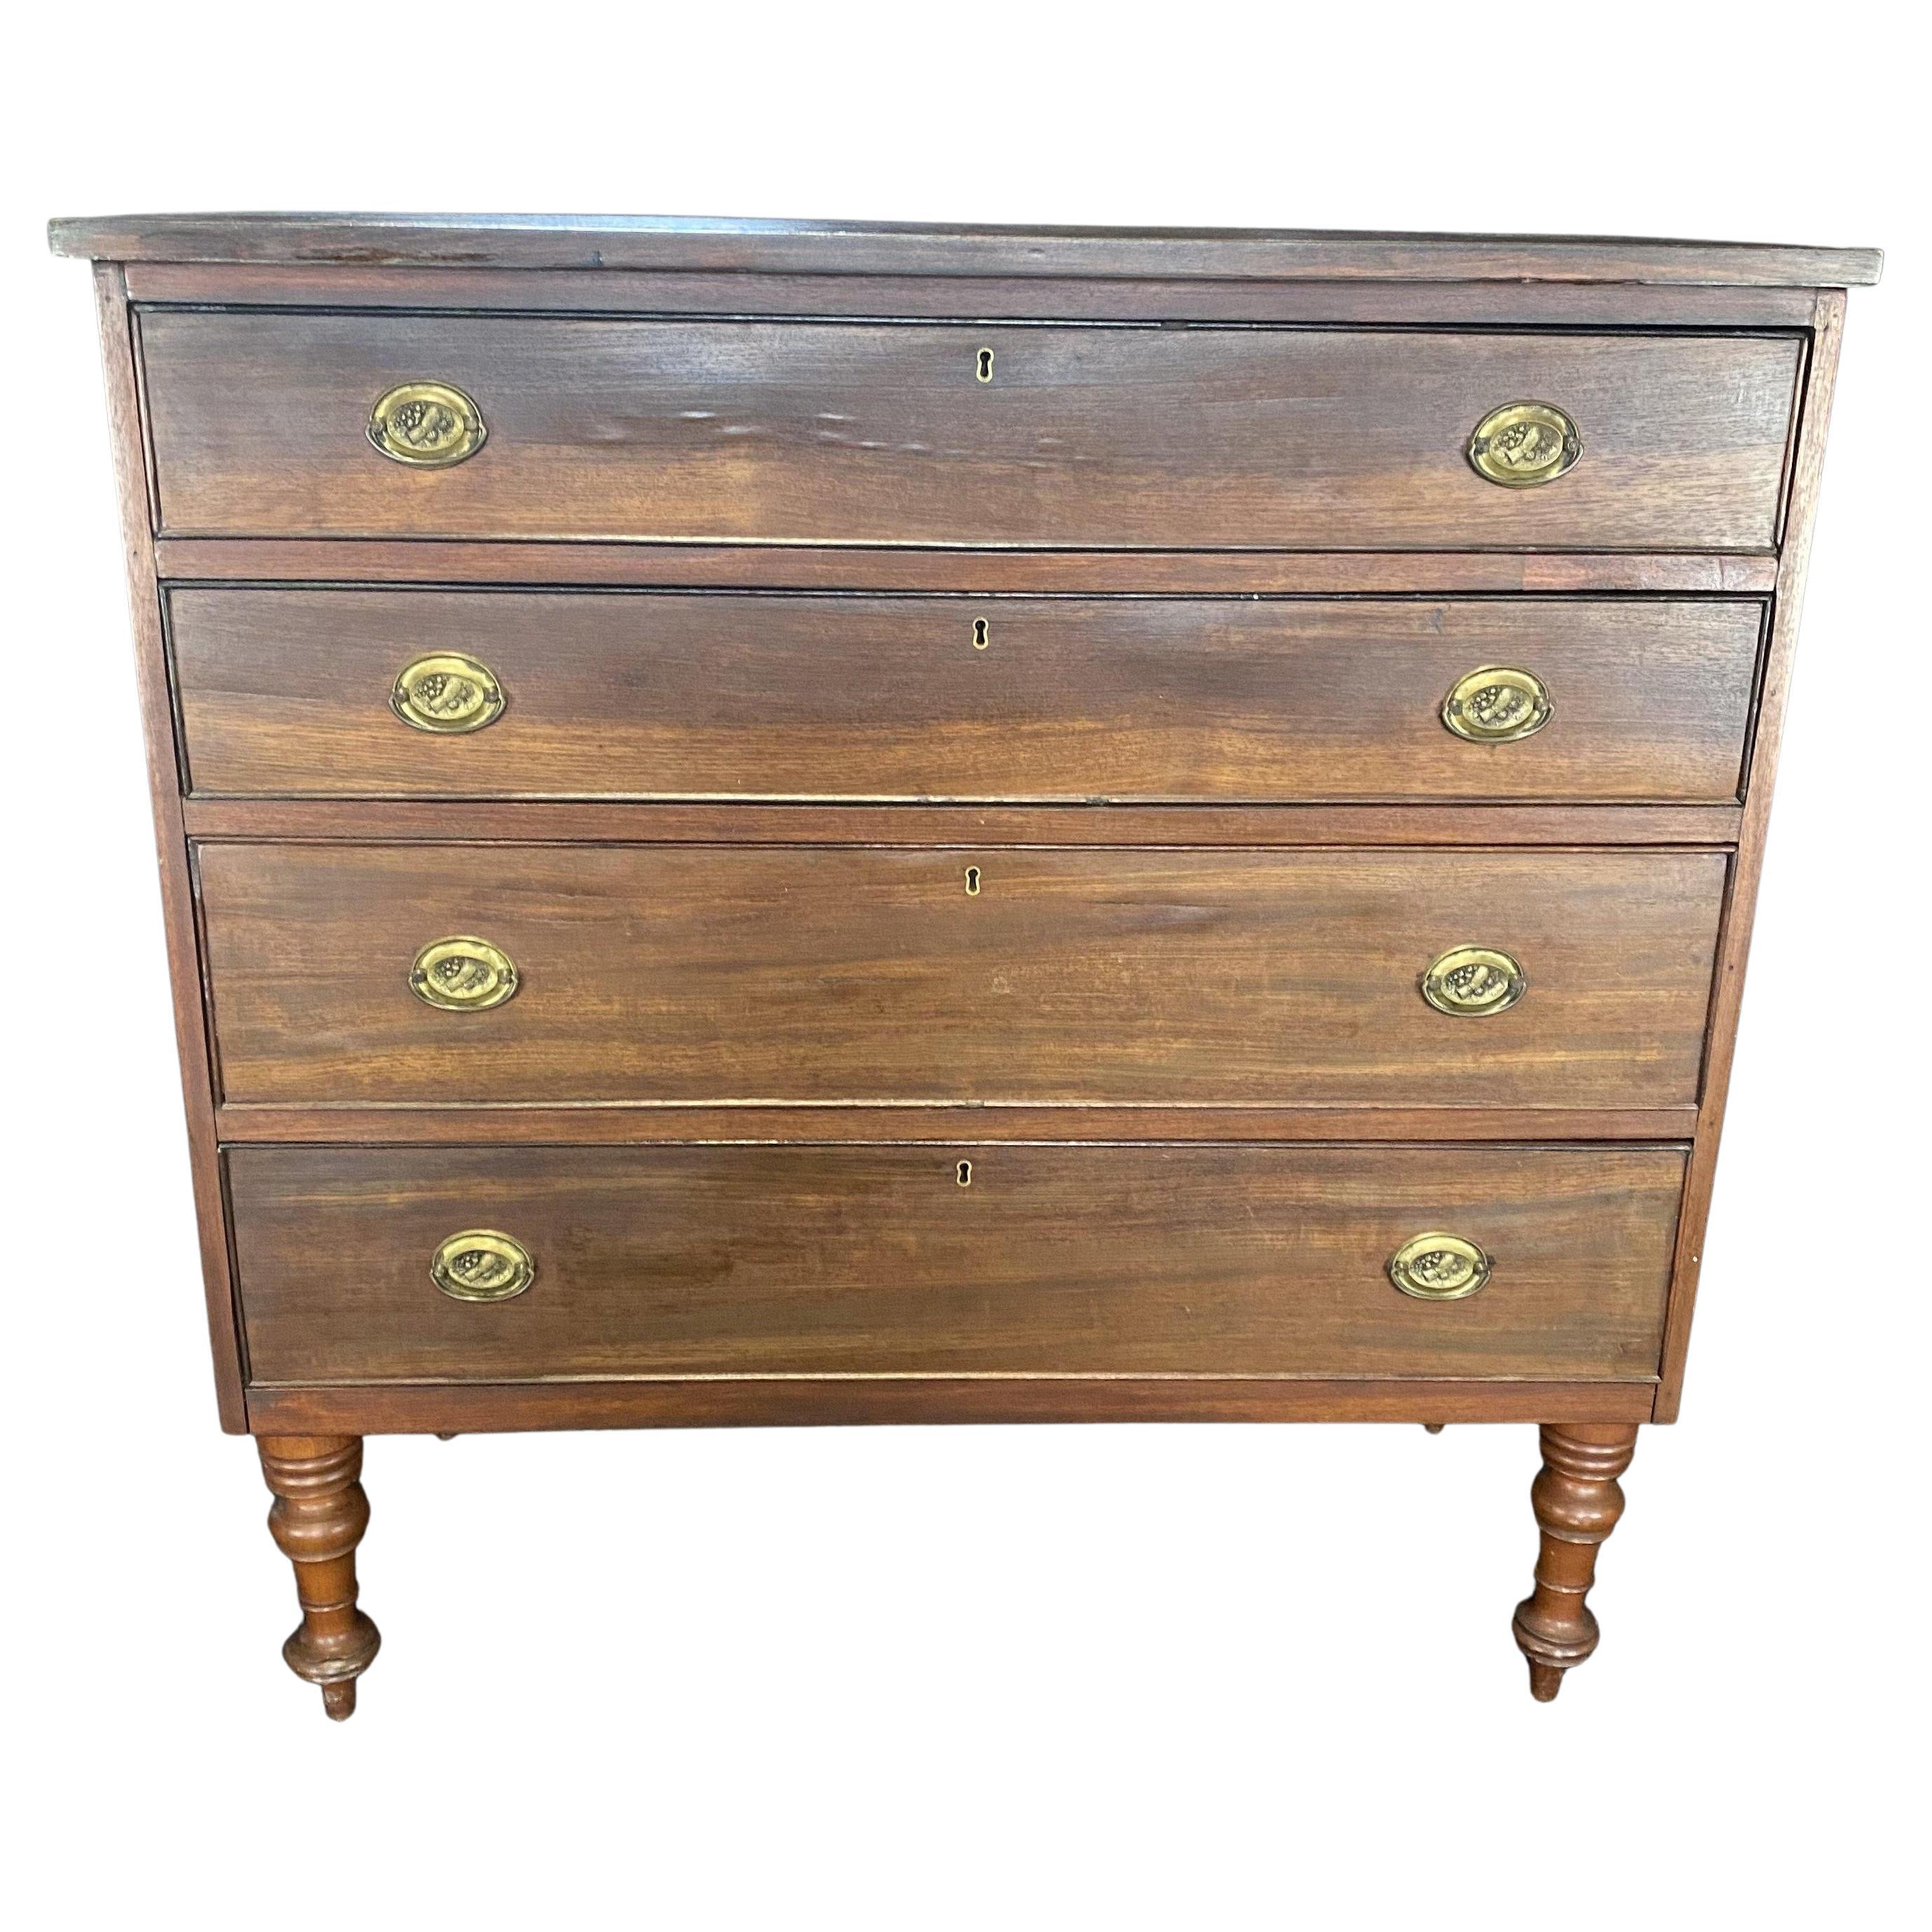 Special Early 19th Century American Sheraton Mahogany Chest of Drawers For Sale